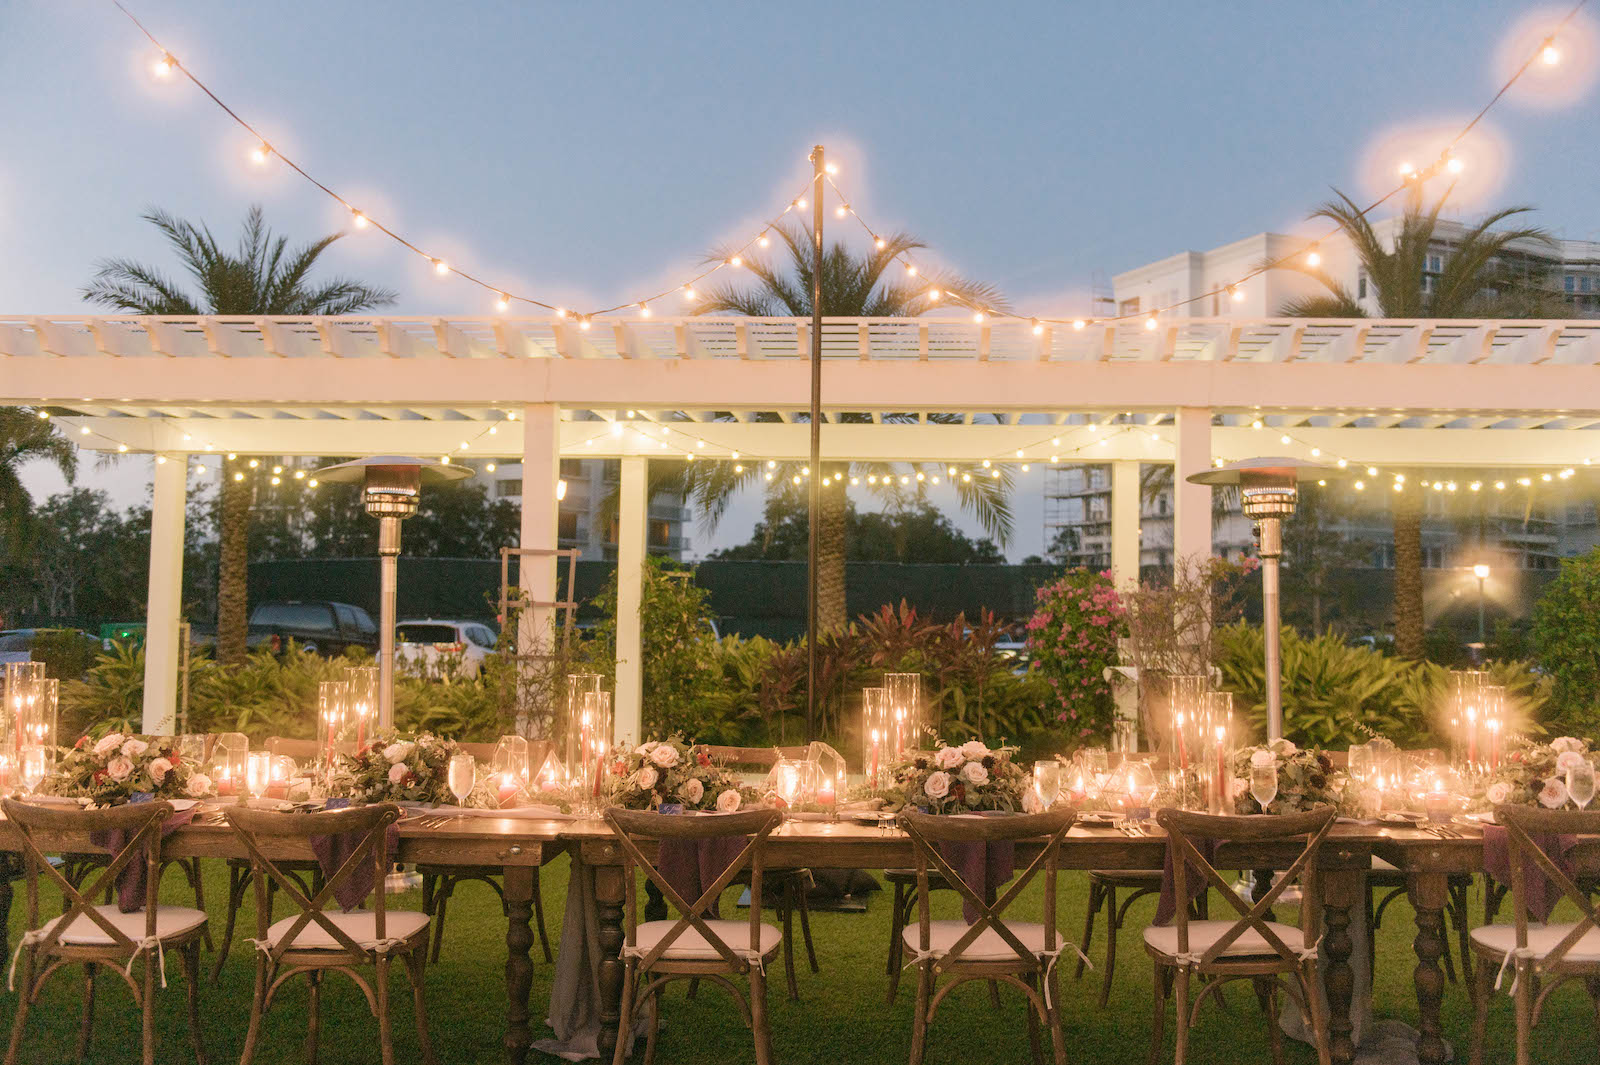 Boho Garden Outdoor Wedding Reception, Long Wooden Feasting Table, White Pergola, Wooden Cross back Chairs, Candles, Low Floral Centerpieces, String Lights | Tampa Bay Wedding Planner Parties A'la Carte | Belleair Wedding Venue Belleview Inn